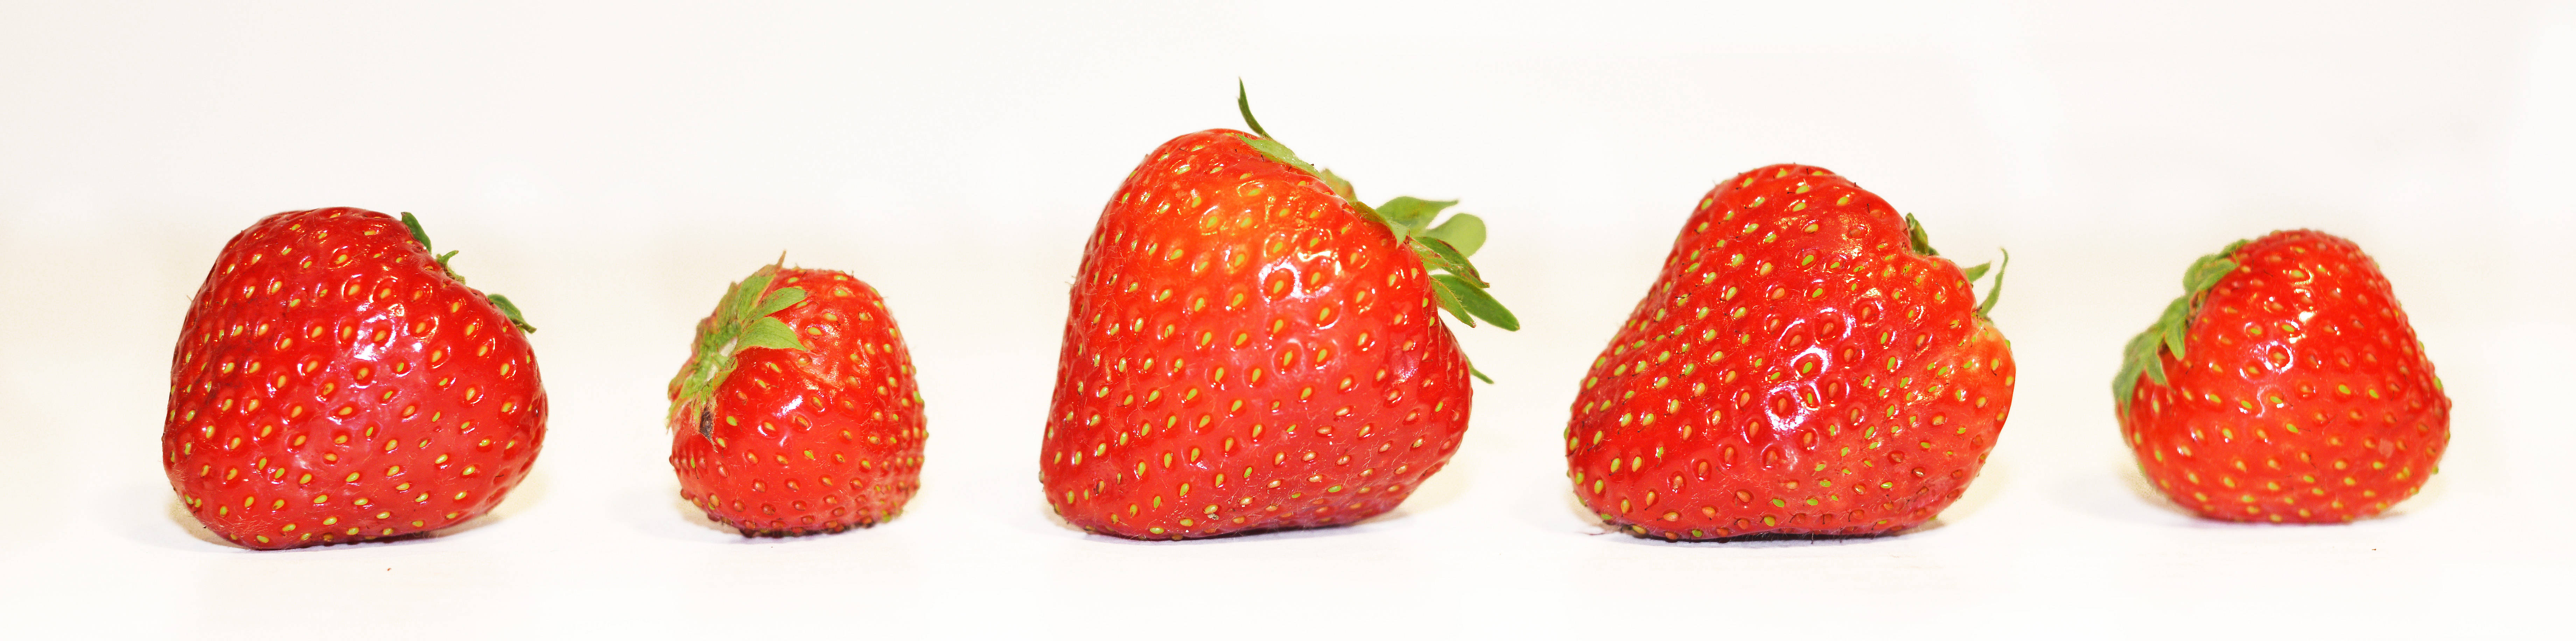 7360X1832 Strawberry Wallpaper and Background